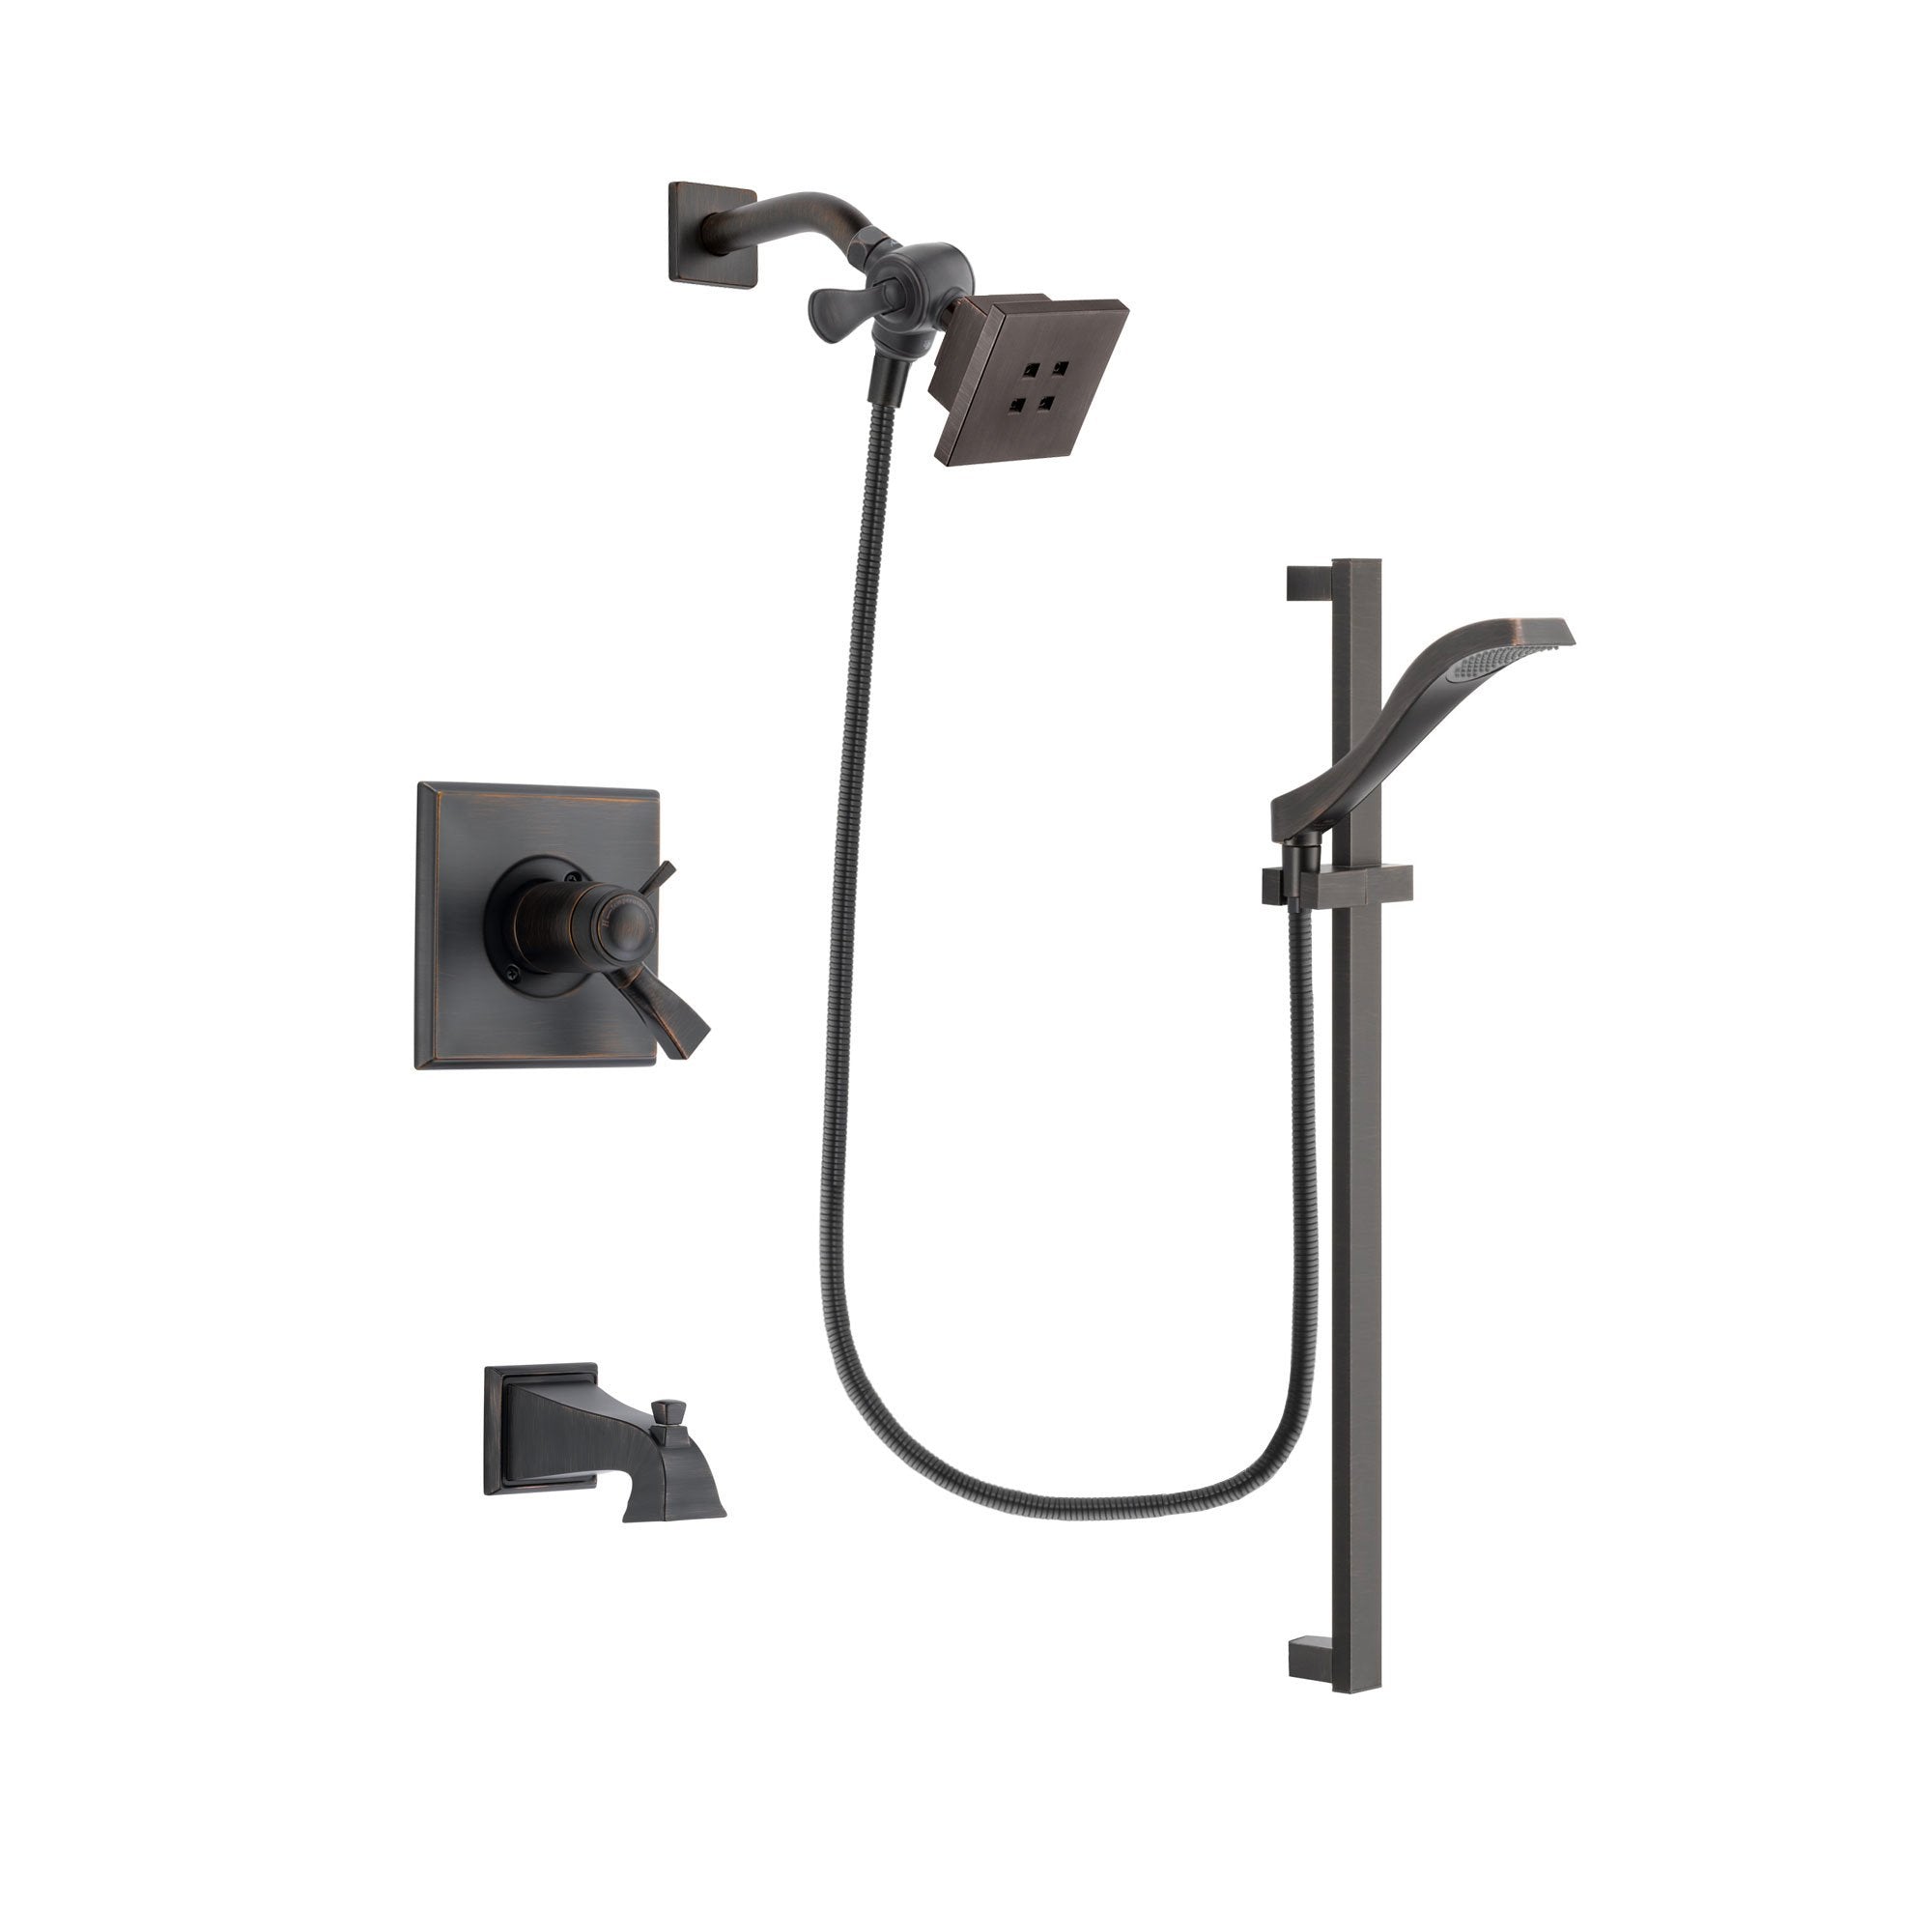 Delta Dryden Venetian Bronze Finish Thermostatic Tub and Shower Faucet System Package with Square Showerhead and Modern Handheld Shower Spray with Slide Bar Includes Rough-in Valve and Tub Spout DSP3101V